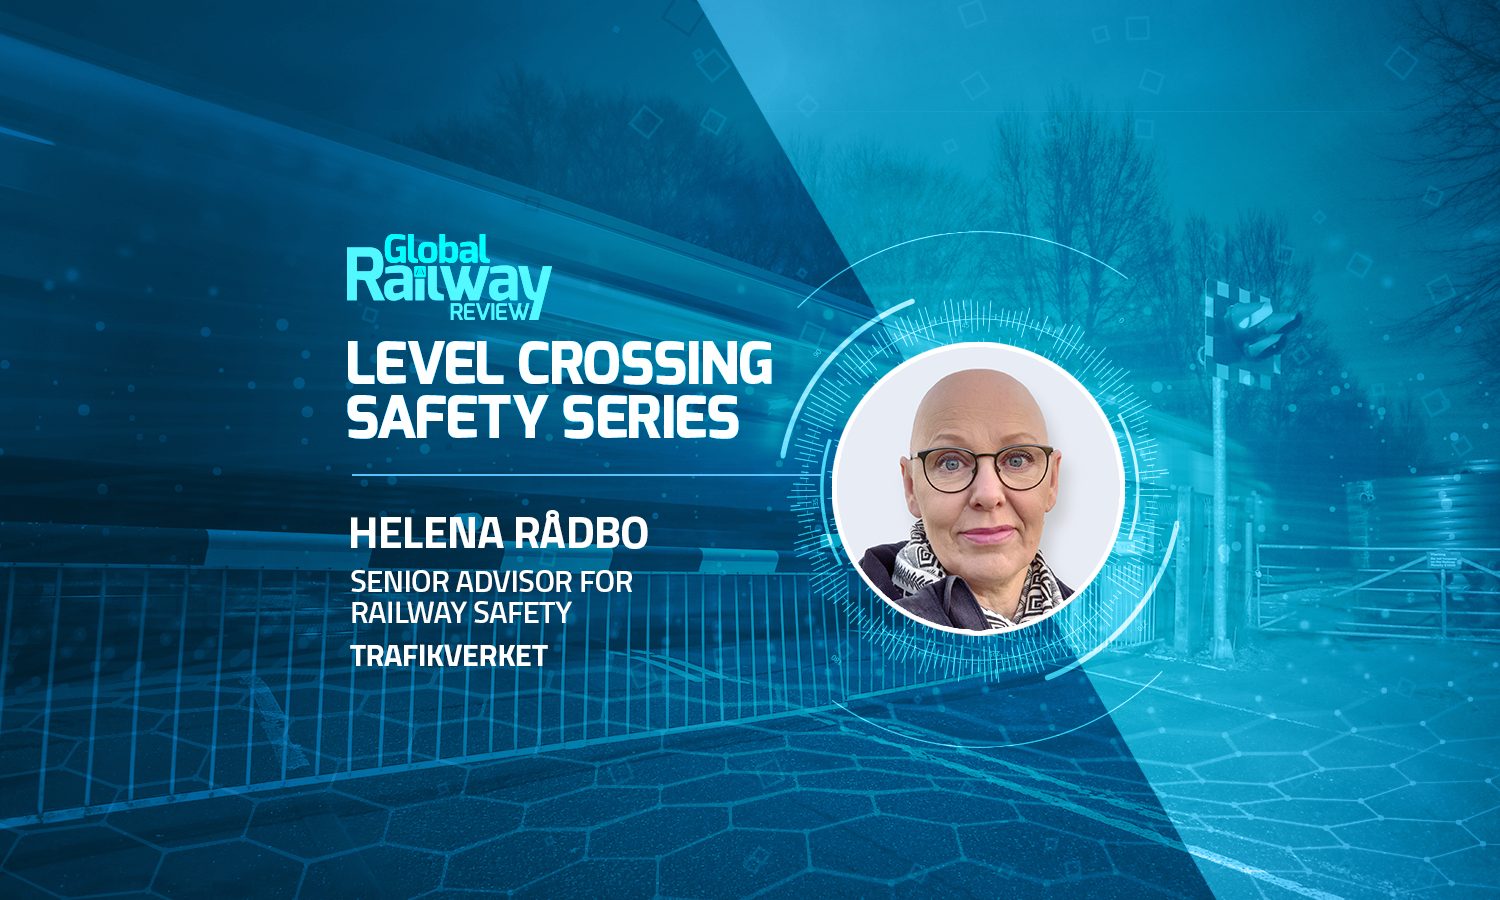 Tackling the issue of safety at Sweden’s level crossings